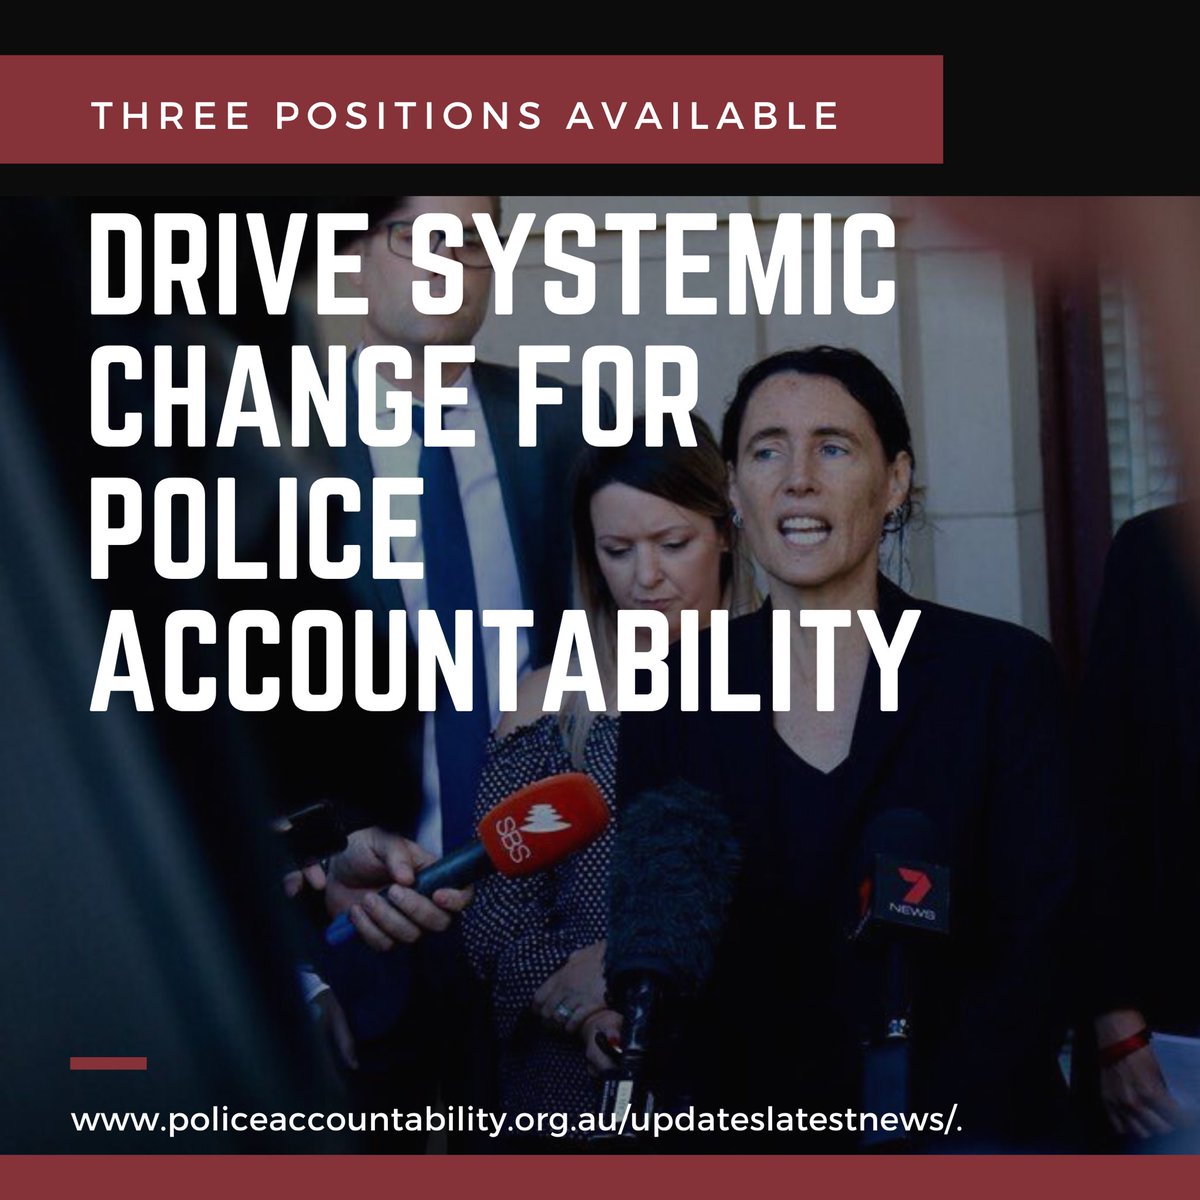 Three exciting positions available in our growing team- each playing a critical role in systemic police accountability in Victoria. #VicPolWatch #positionsvacant #communityLaw #HumanRights policeaccountability.org.au/event/three_ne…